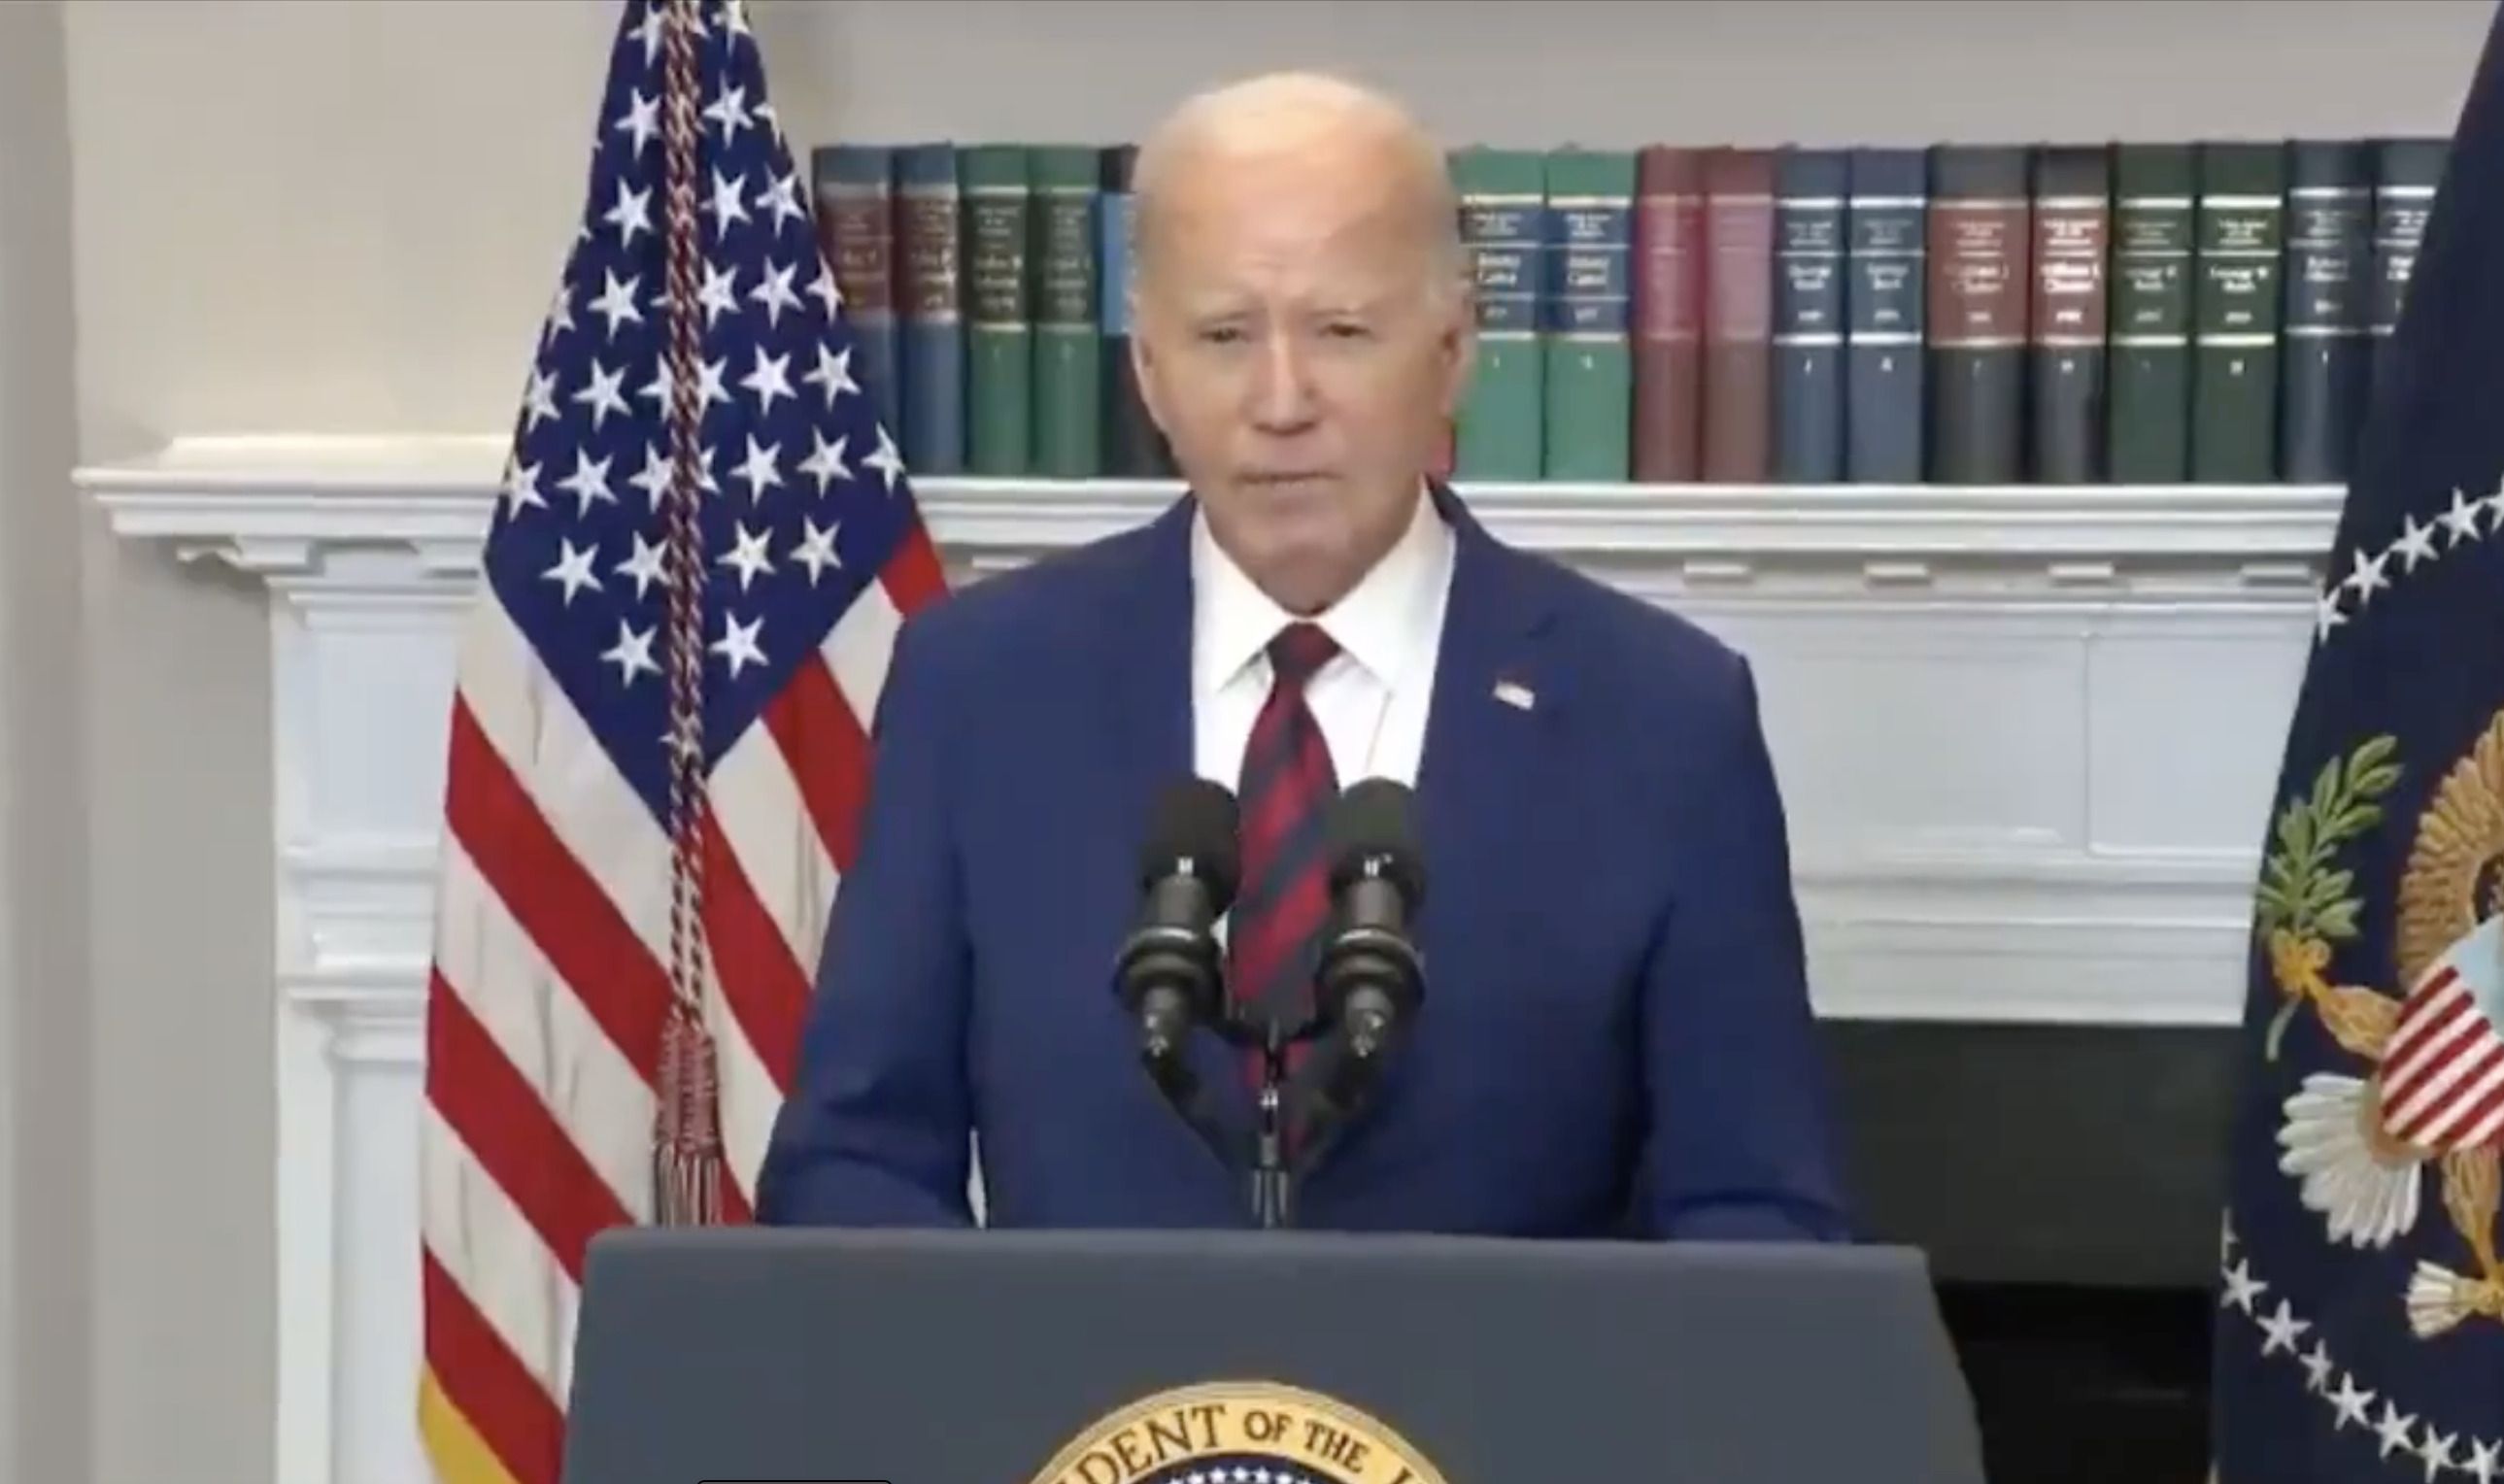 Biden Staffer Suddenly Resigns: “I Can No Longer in Good Conscience Continue to Represent This Administration”